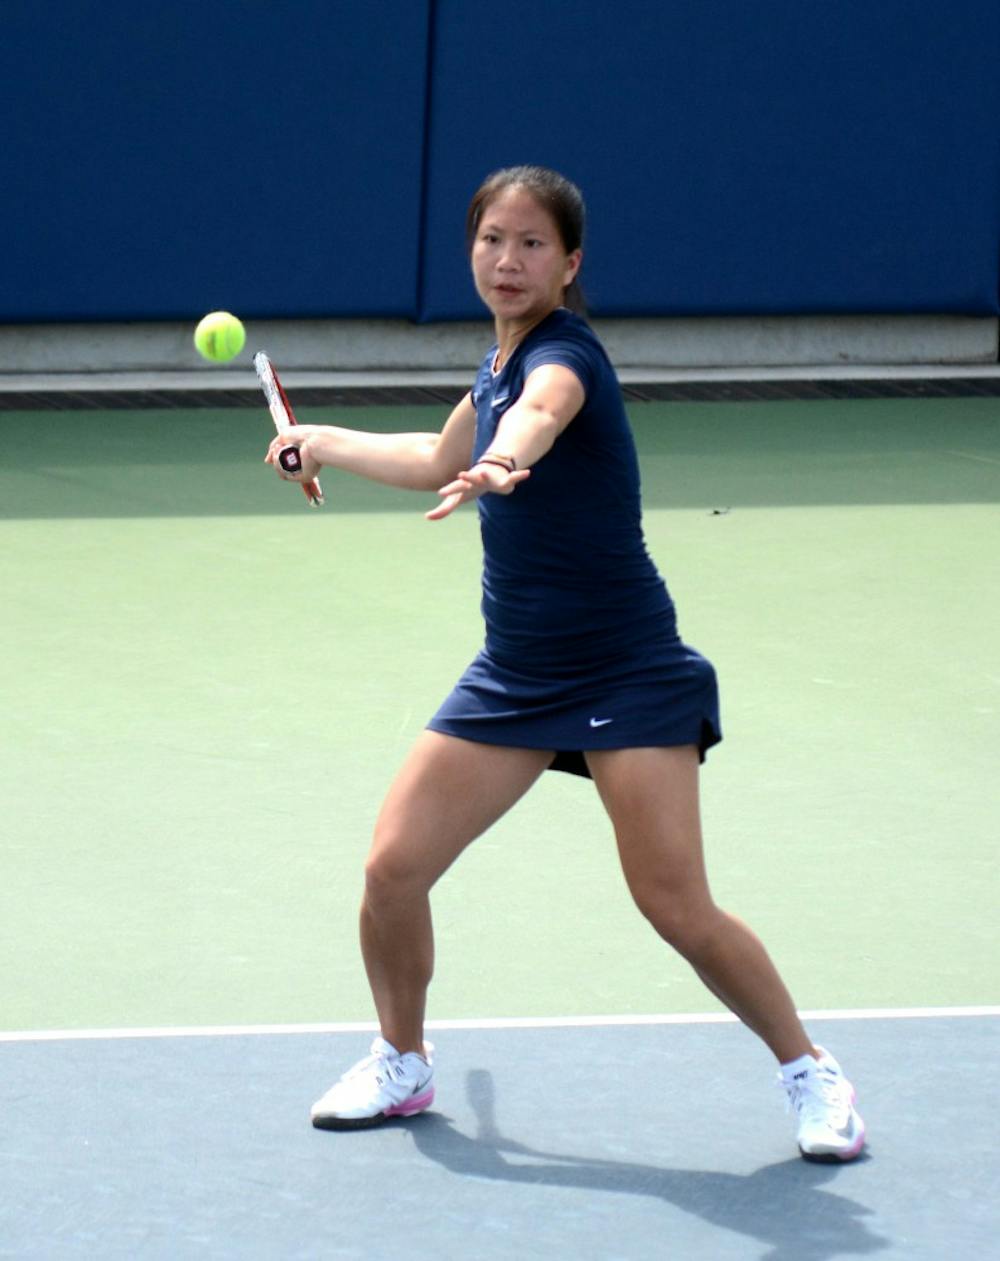 Senior Stephanie Do had a big weekend for the Red and Blue, making contributions in doubles and coming up with a three-set victory in a must-win match on Sunday.